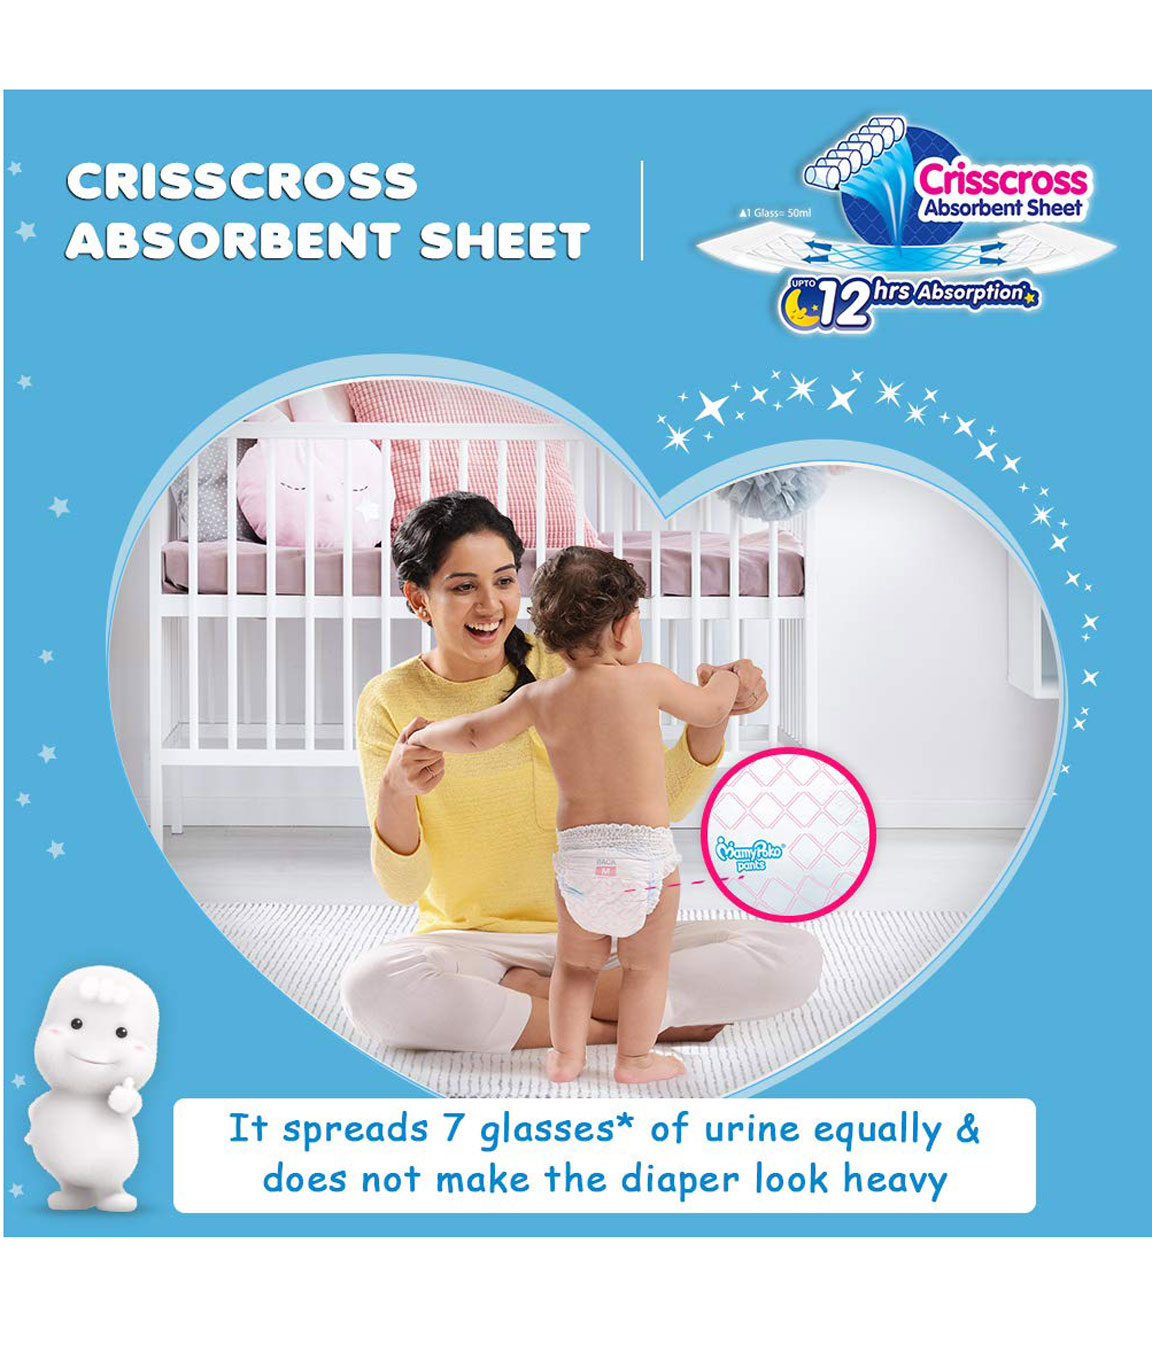 Buy MAMYPOKO PANTS EXTRA ABSORB DIAPERS EXTRA LARGE 1217 KG  96 DIAPERS  Online  Get Upto 60 OFF at PharmEasy